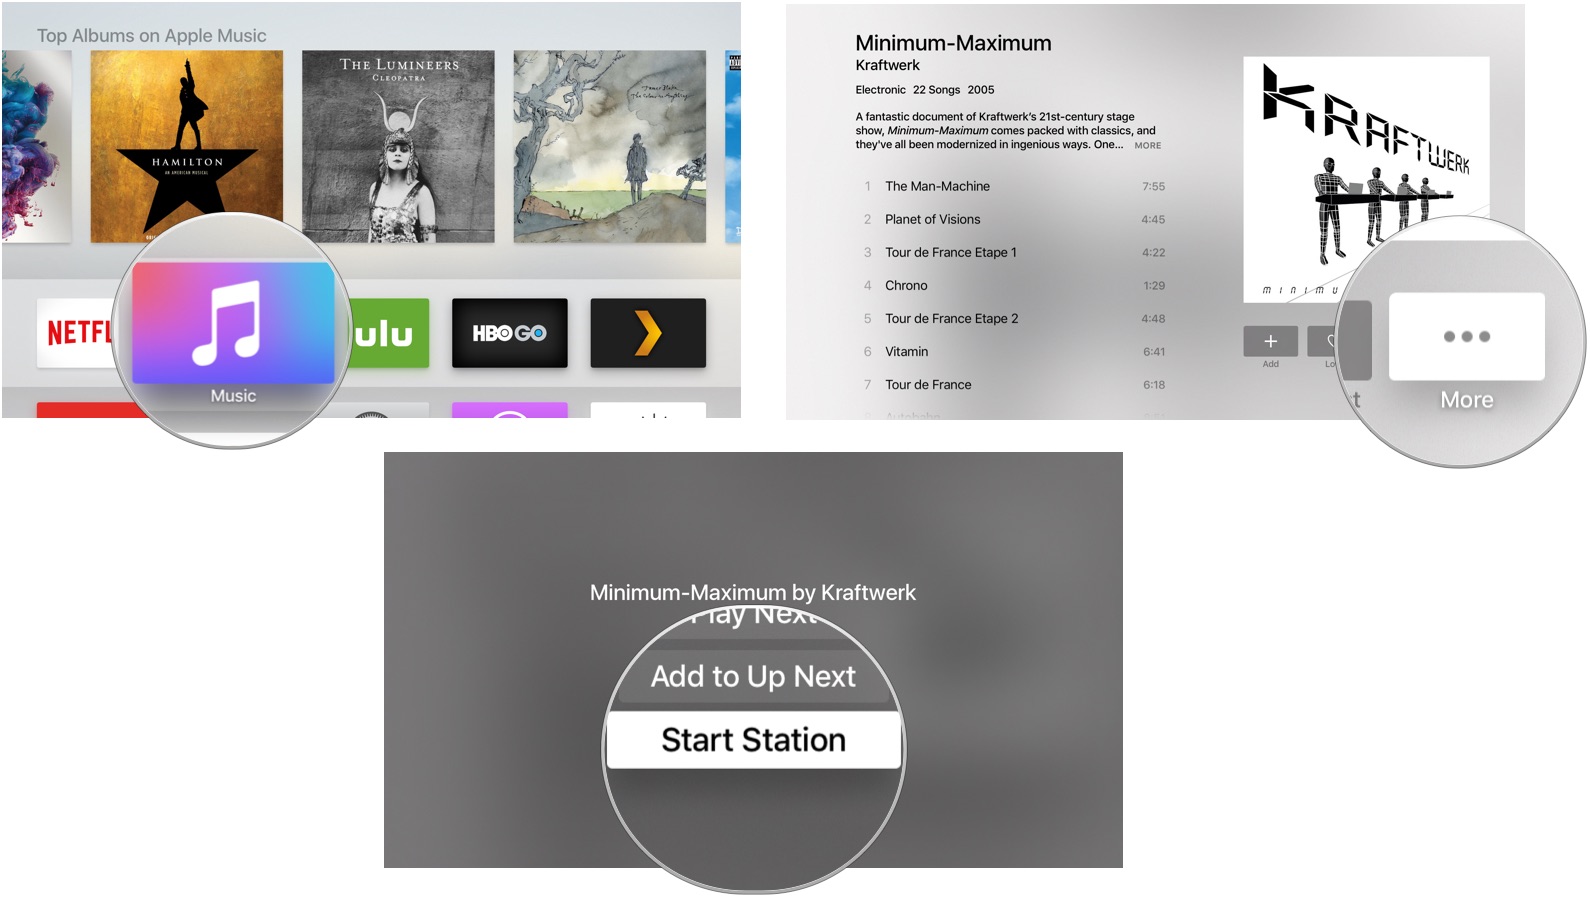 Starting a station based on an album in Apple Music on Apple TV